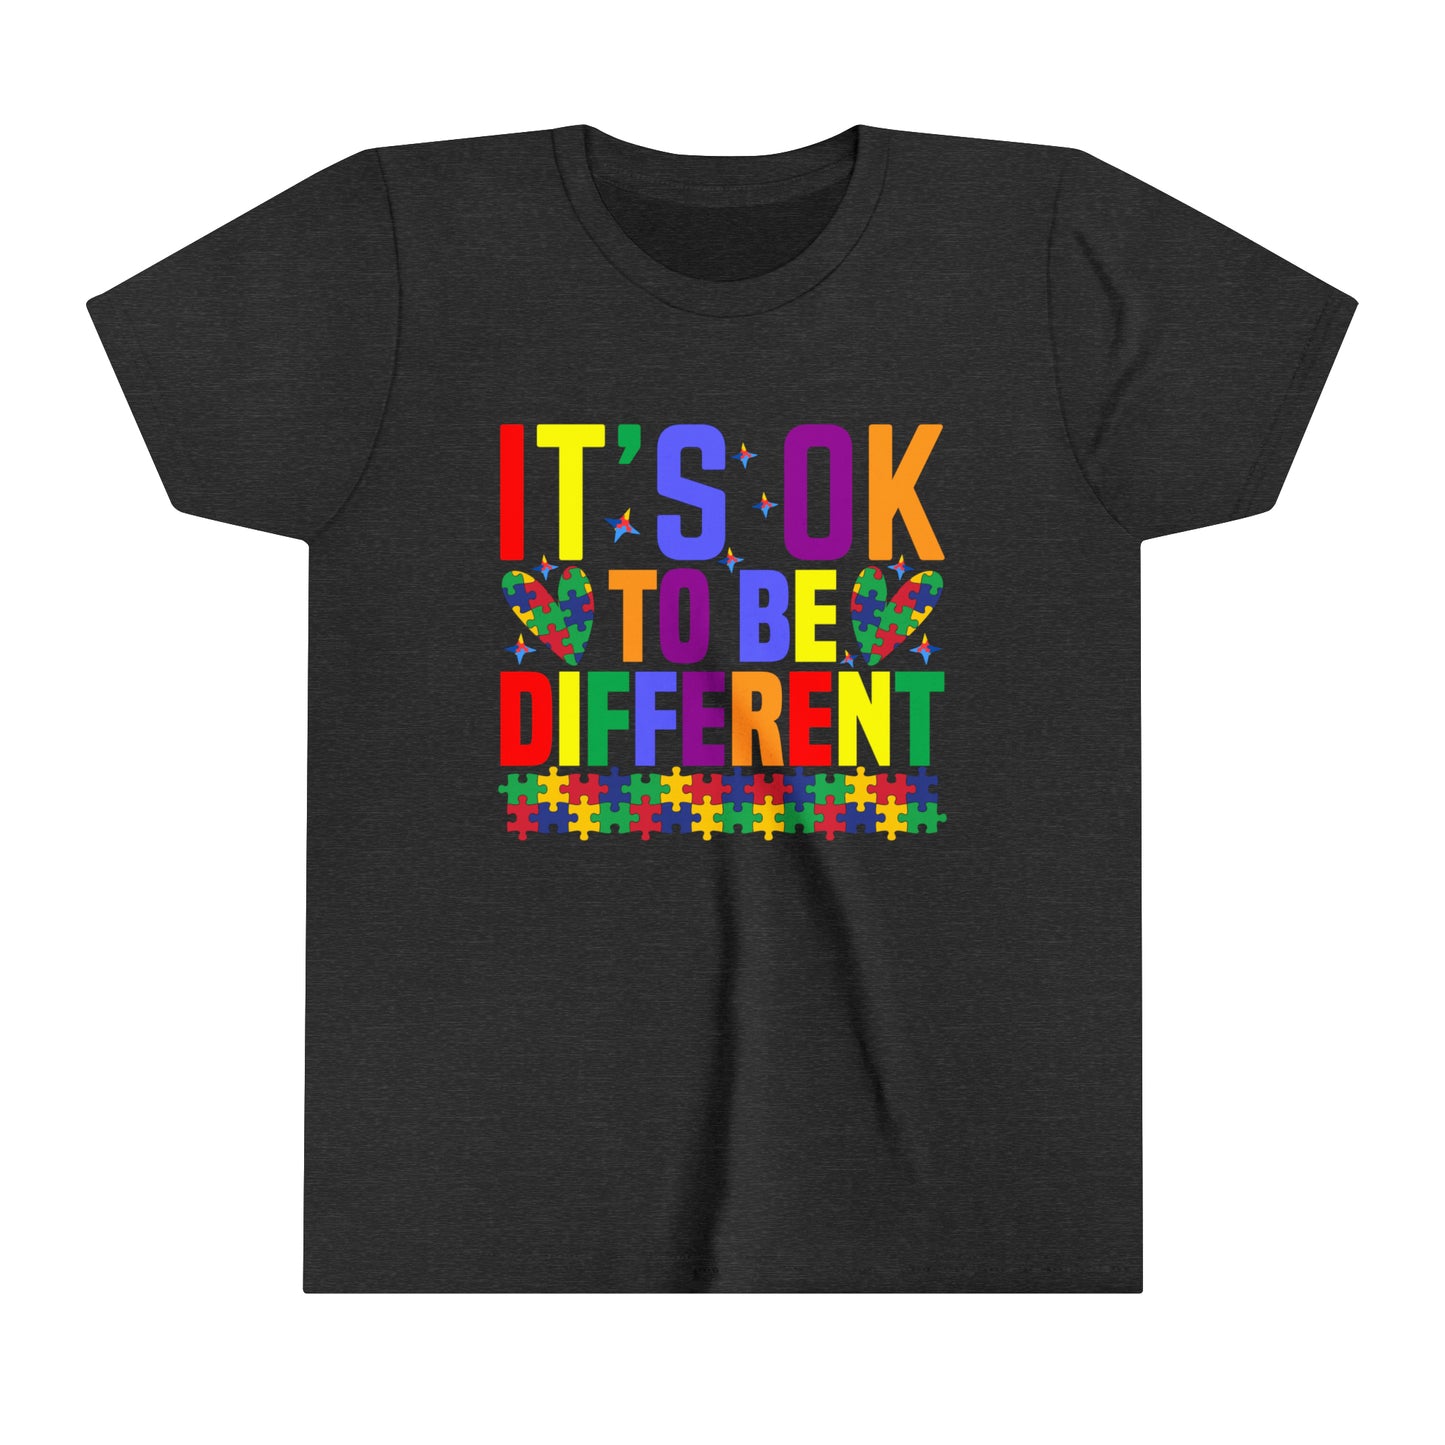 It's Okay to Be Different Autism Advocate Awareness Youth Shirt